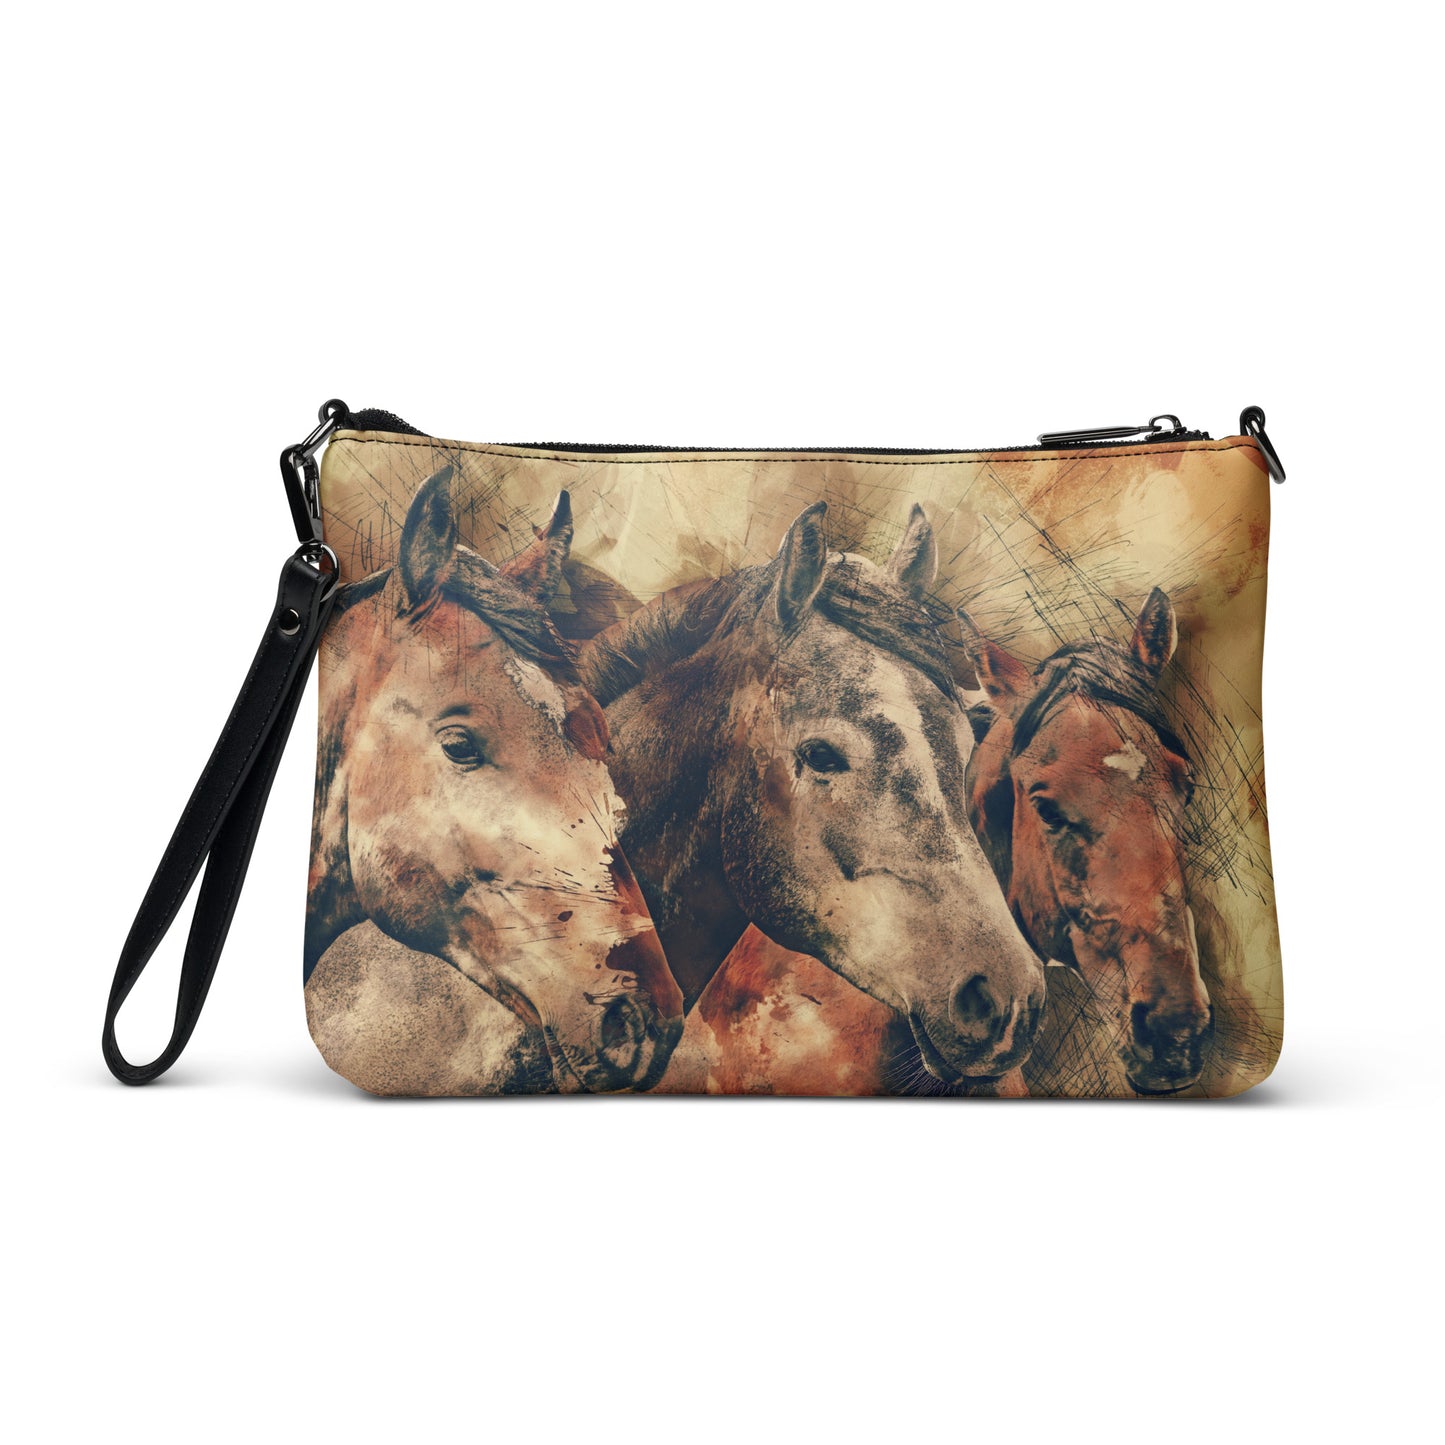 Crossbody bag Printed with a scene of 3 Horses